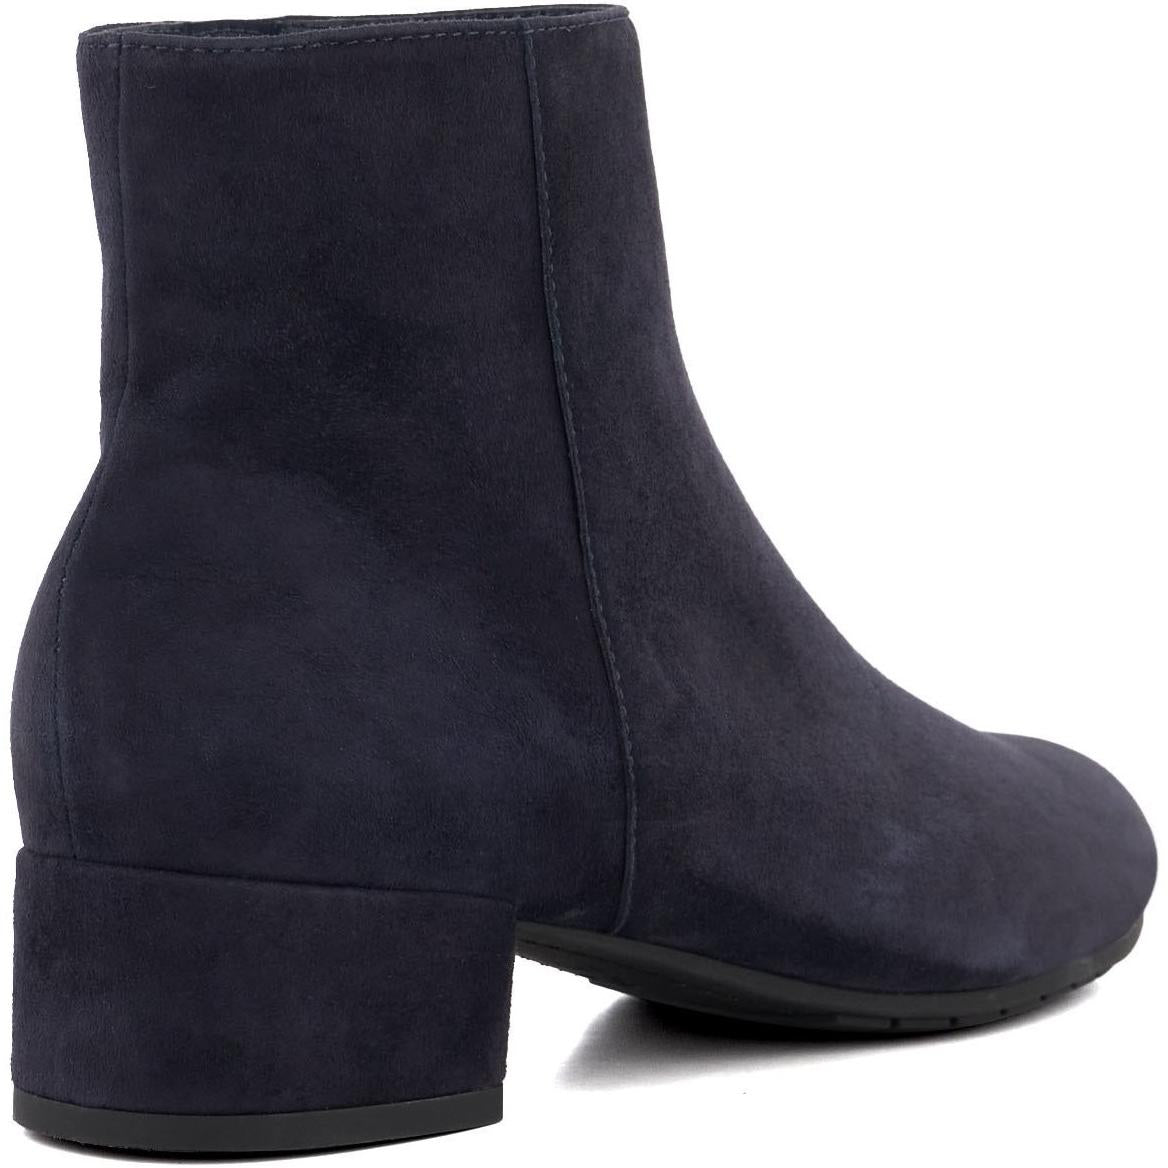 Dune London Pippie Mid Boot